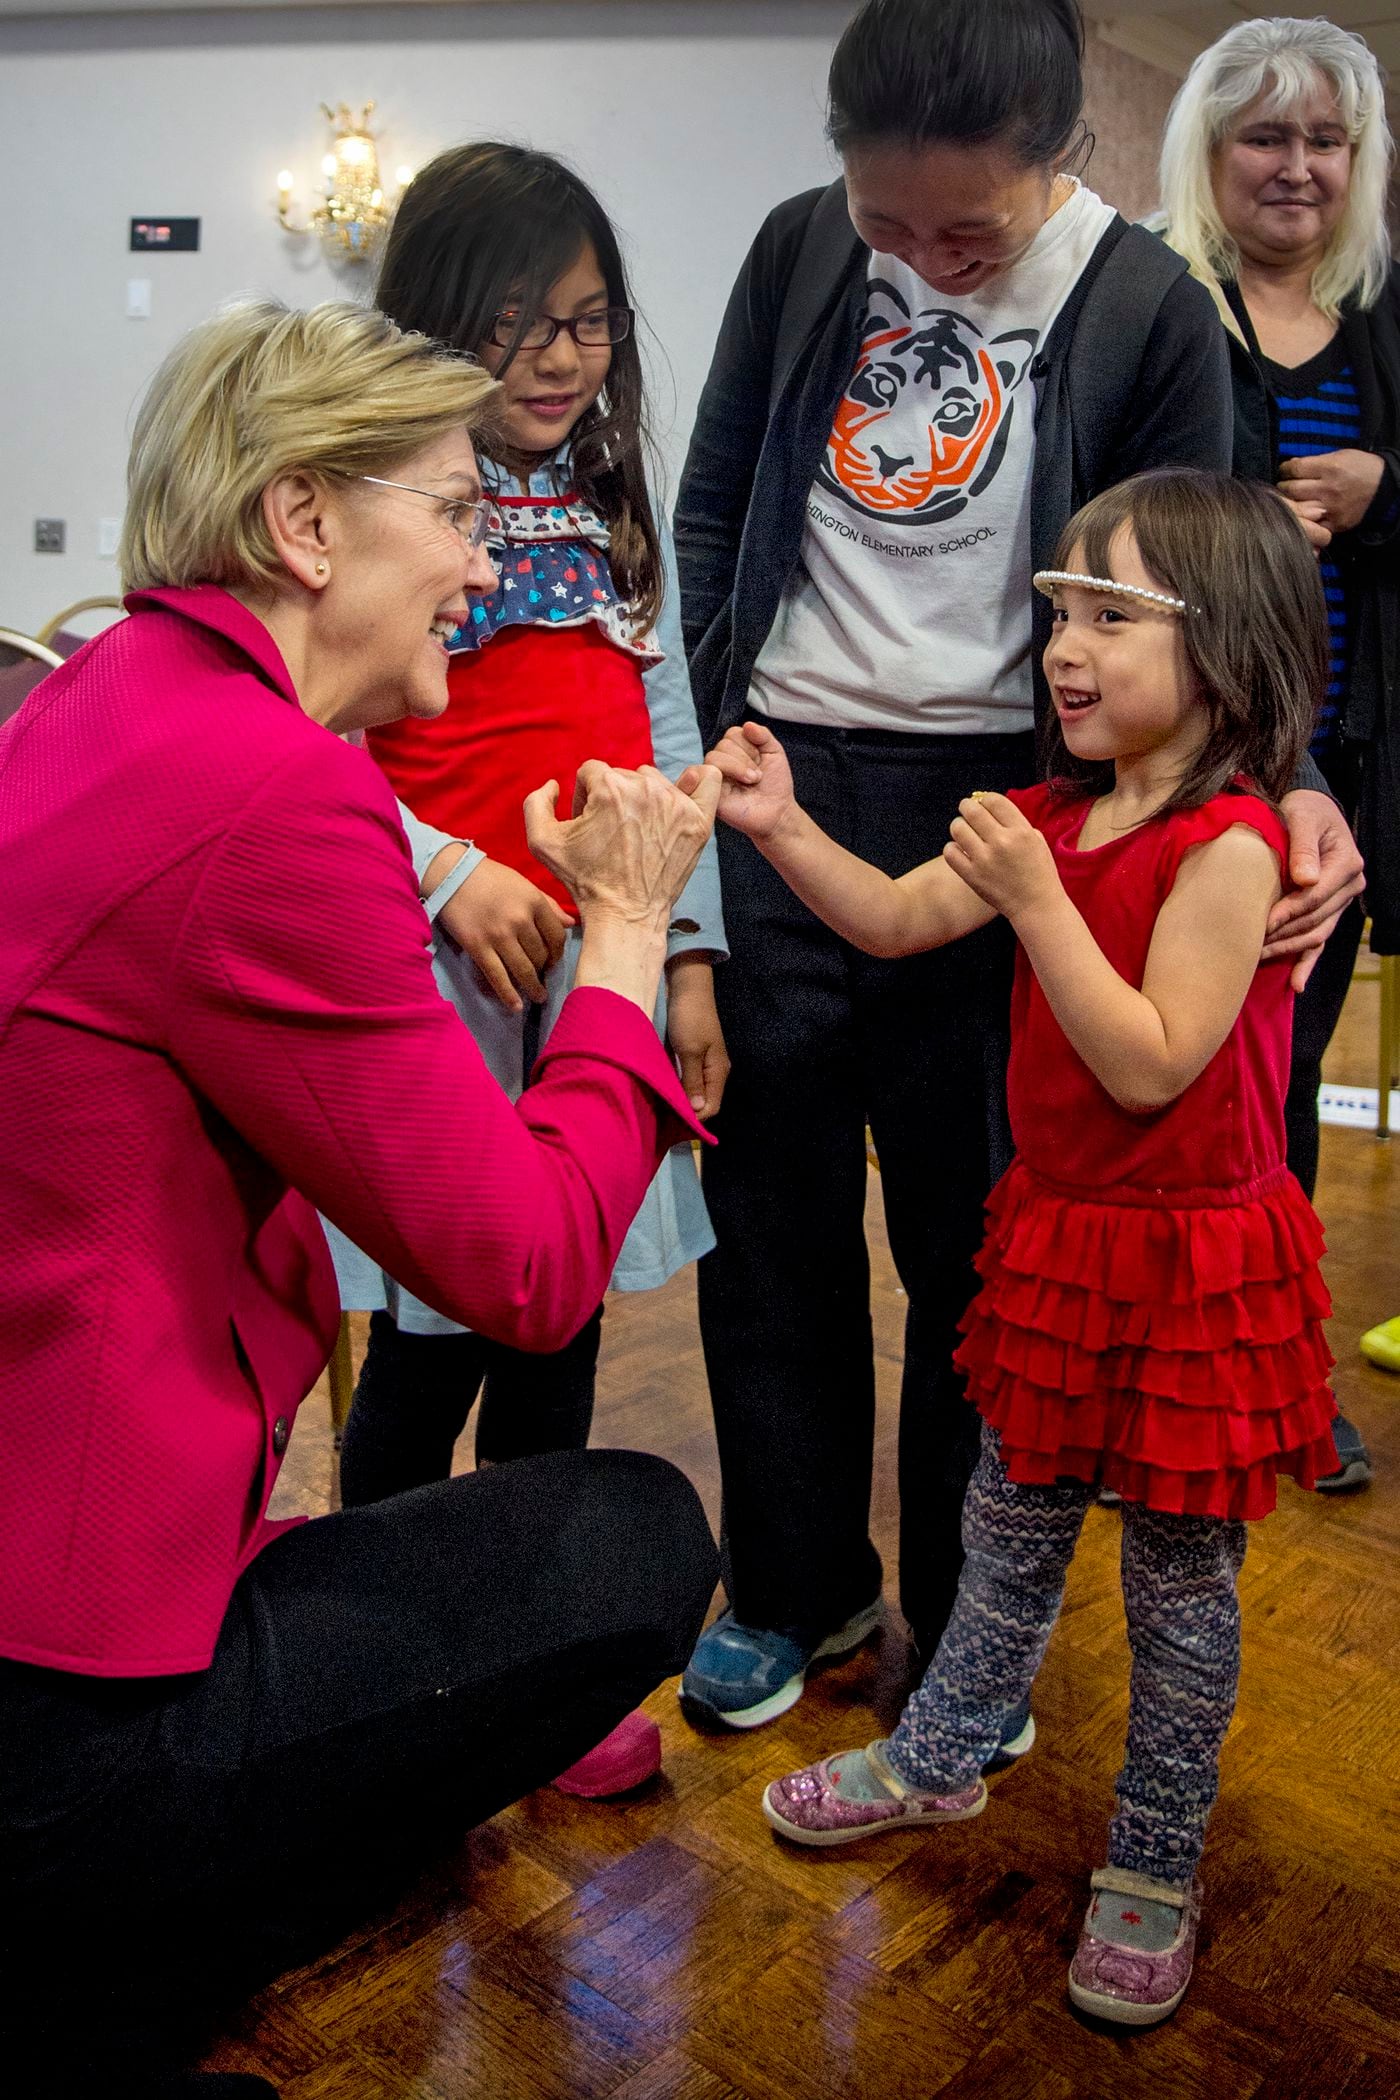 Democratic presidential candidate Sen. Elizabeth Warren gets on her knees to "pinky swear" with five year old Sarah Buse-Morley saying "that's what girls do," when talking about running for president, following a meeting with members of the American Federation of Teachers, at the Plumbers Local 690 Union Hall in Northeast Philadelphia May 13, 2019. Sarah's mom, Meredith Buse (rear) teaches first grade at Vare-Washington Elementary School. Her other daughter is Rebecca Buse-Morley (rear, left), 8.